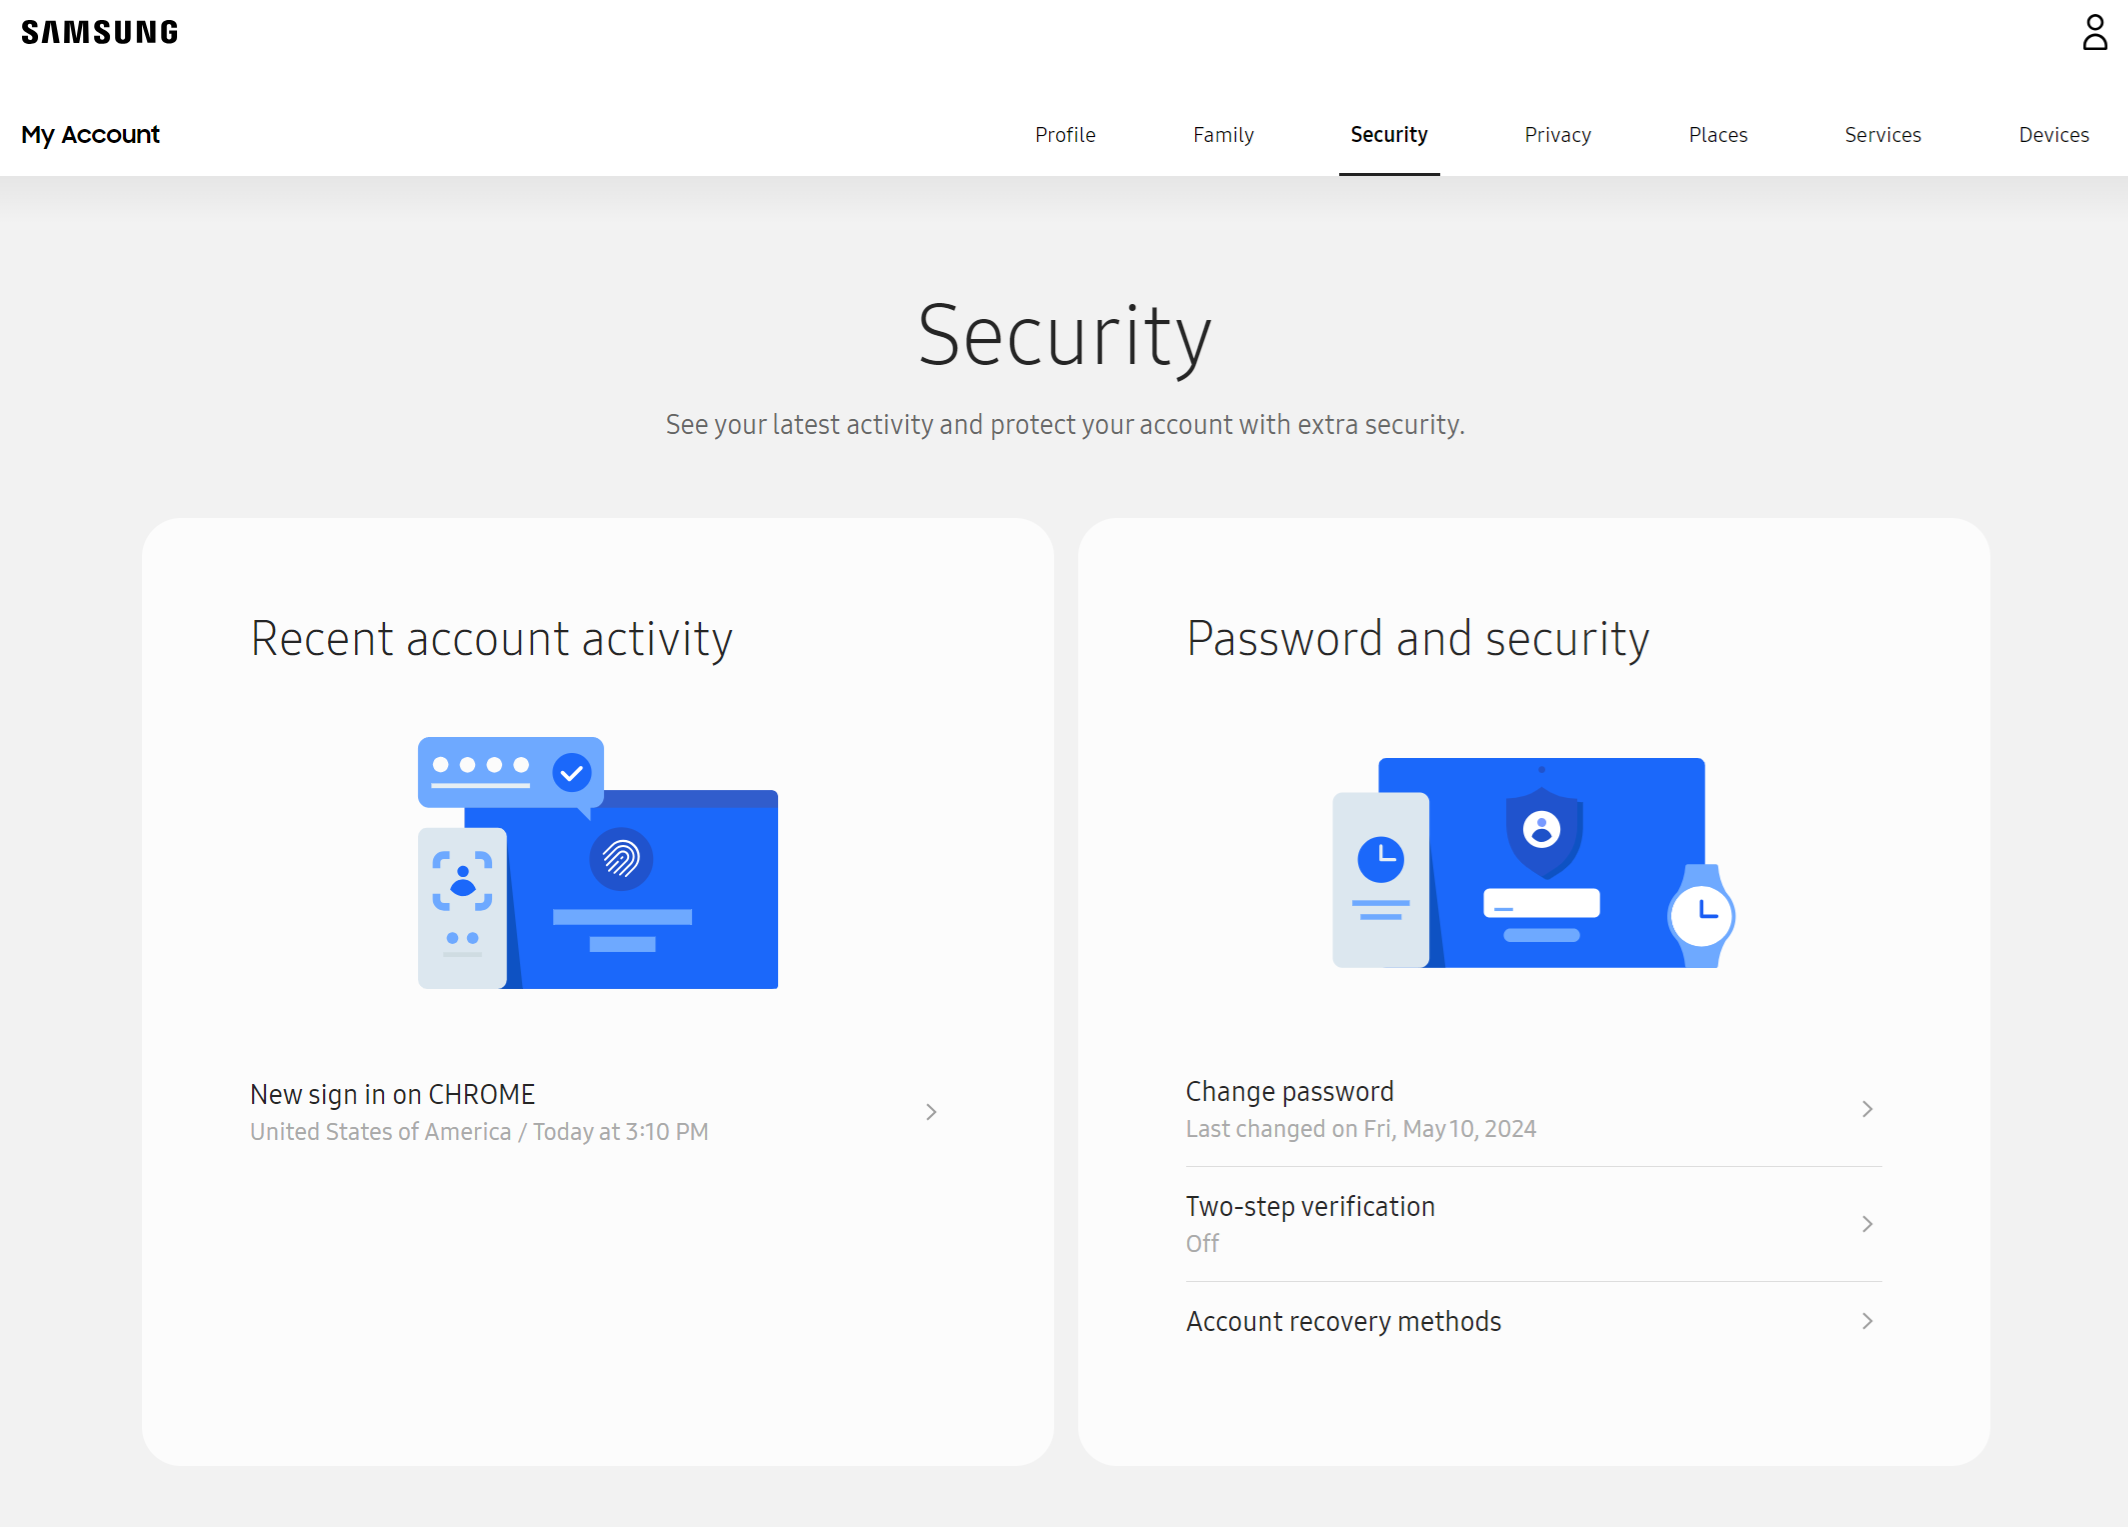 The Security page of your Samsung account.